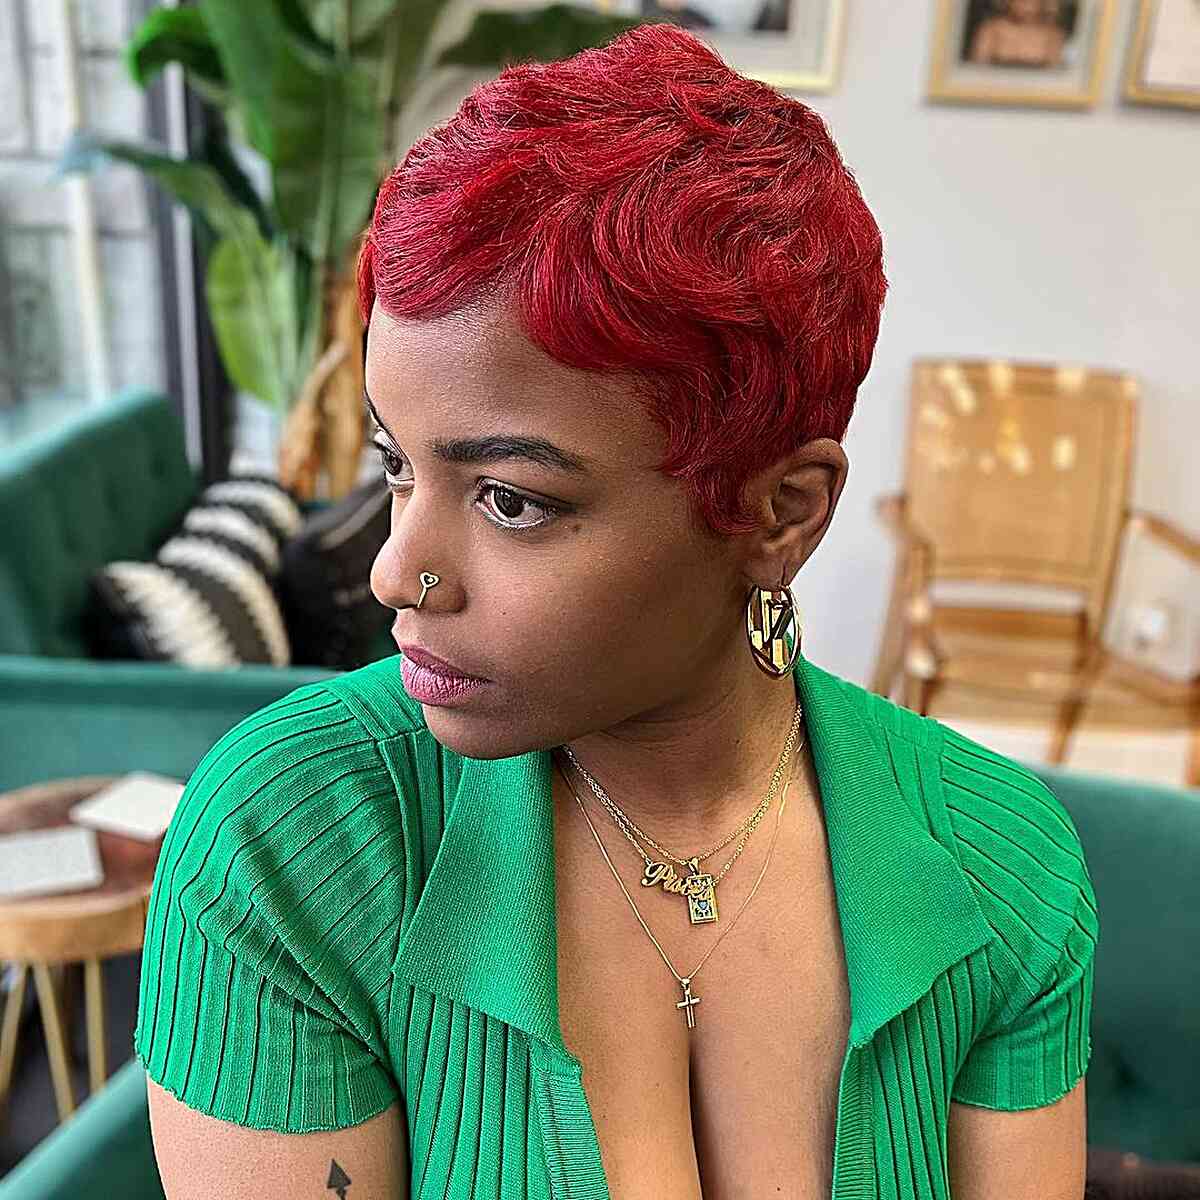 Image of Pixie cut hairstyle for red hair